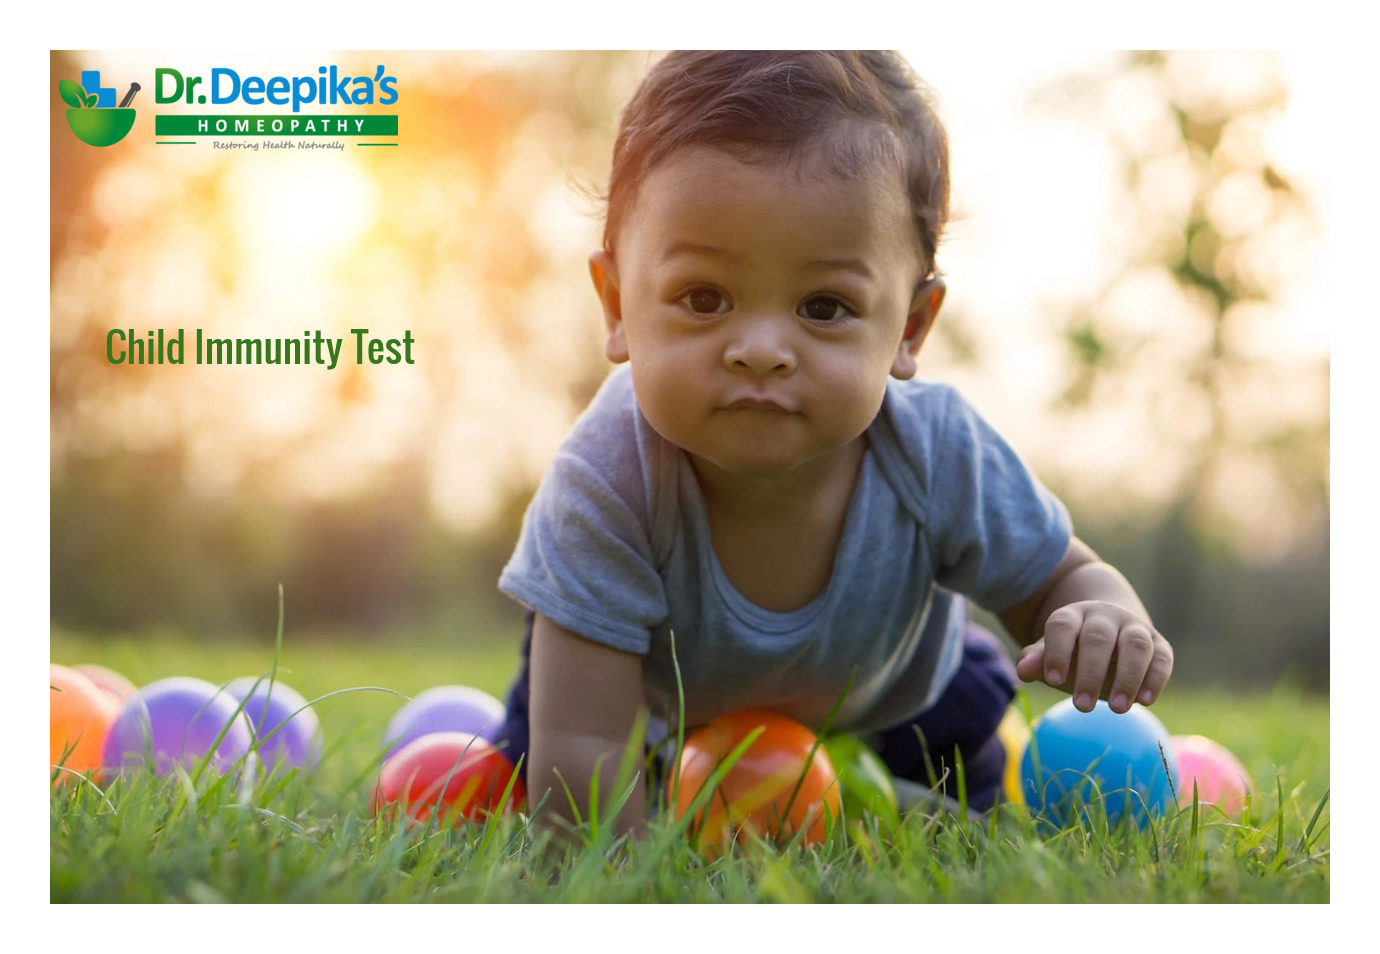 A to Z of Child Immunity by Dr. Deepika’s Homeopathy | Best homeopathic doctor near you